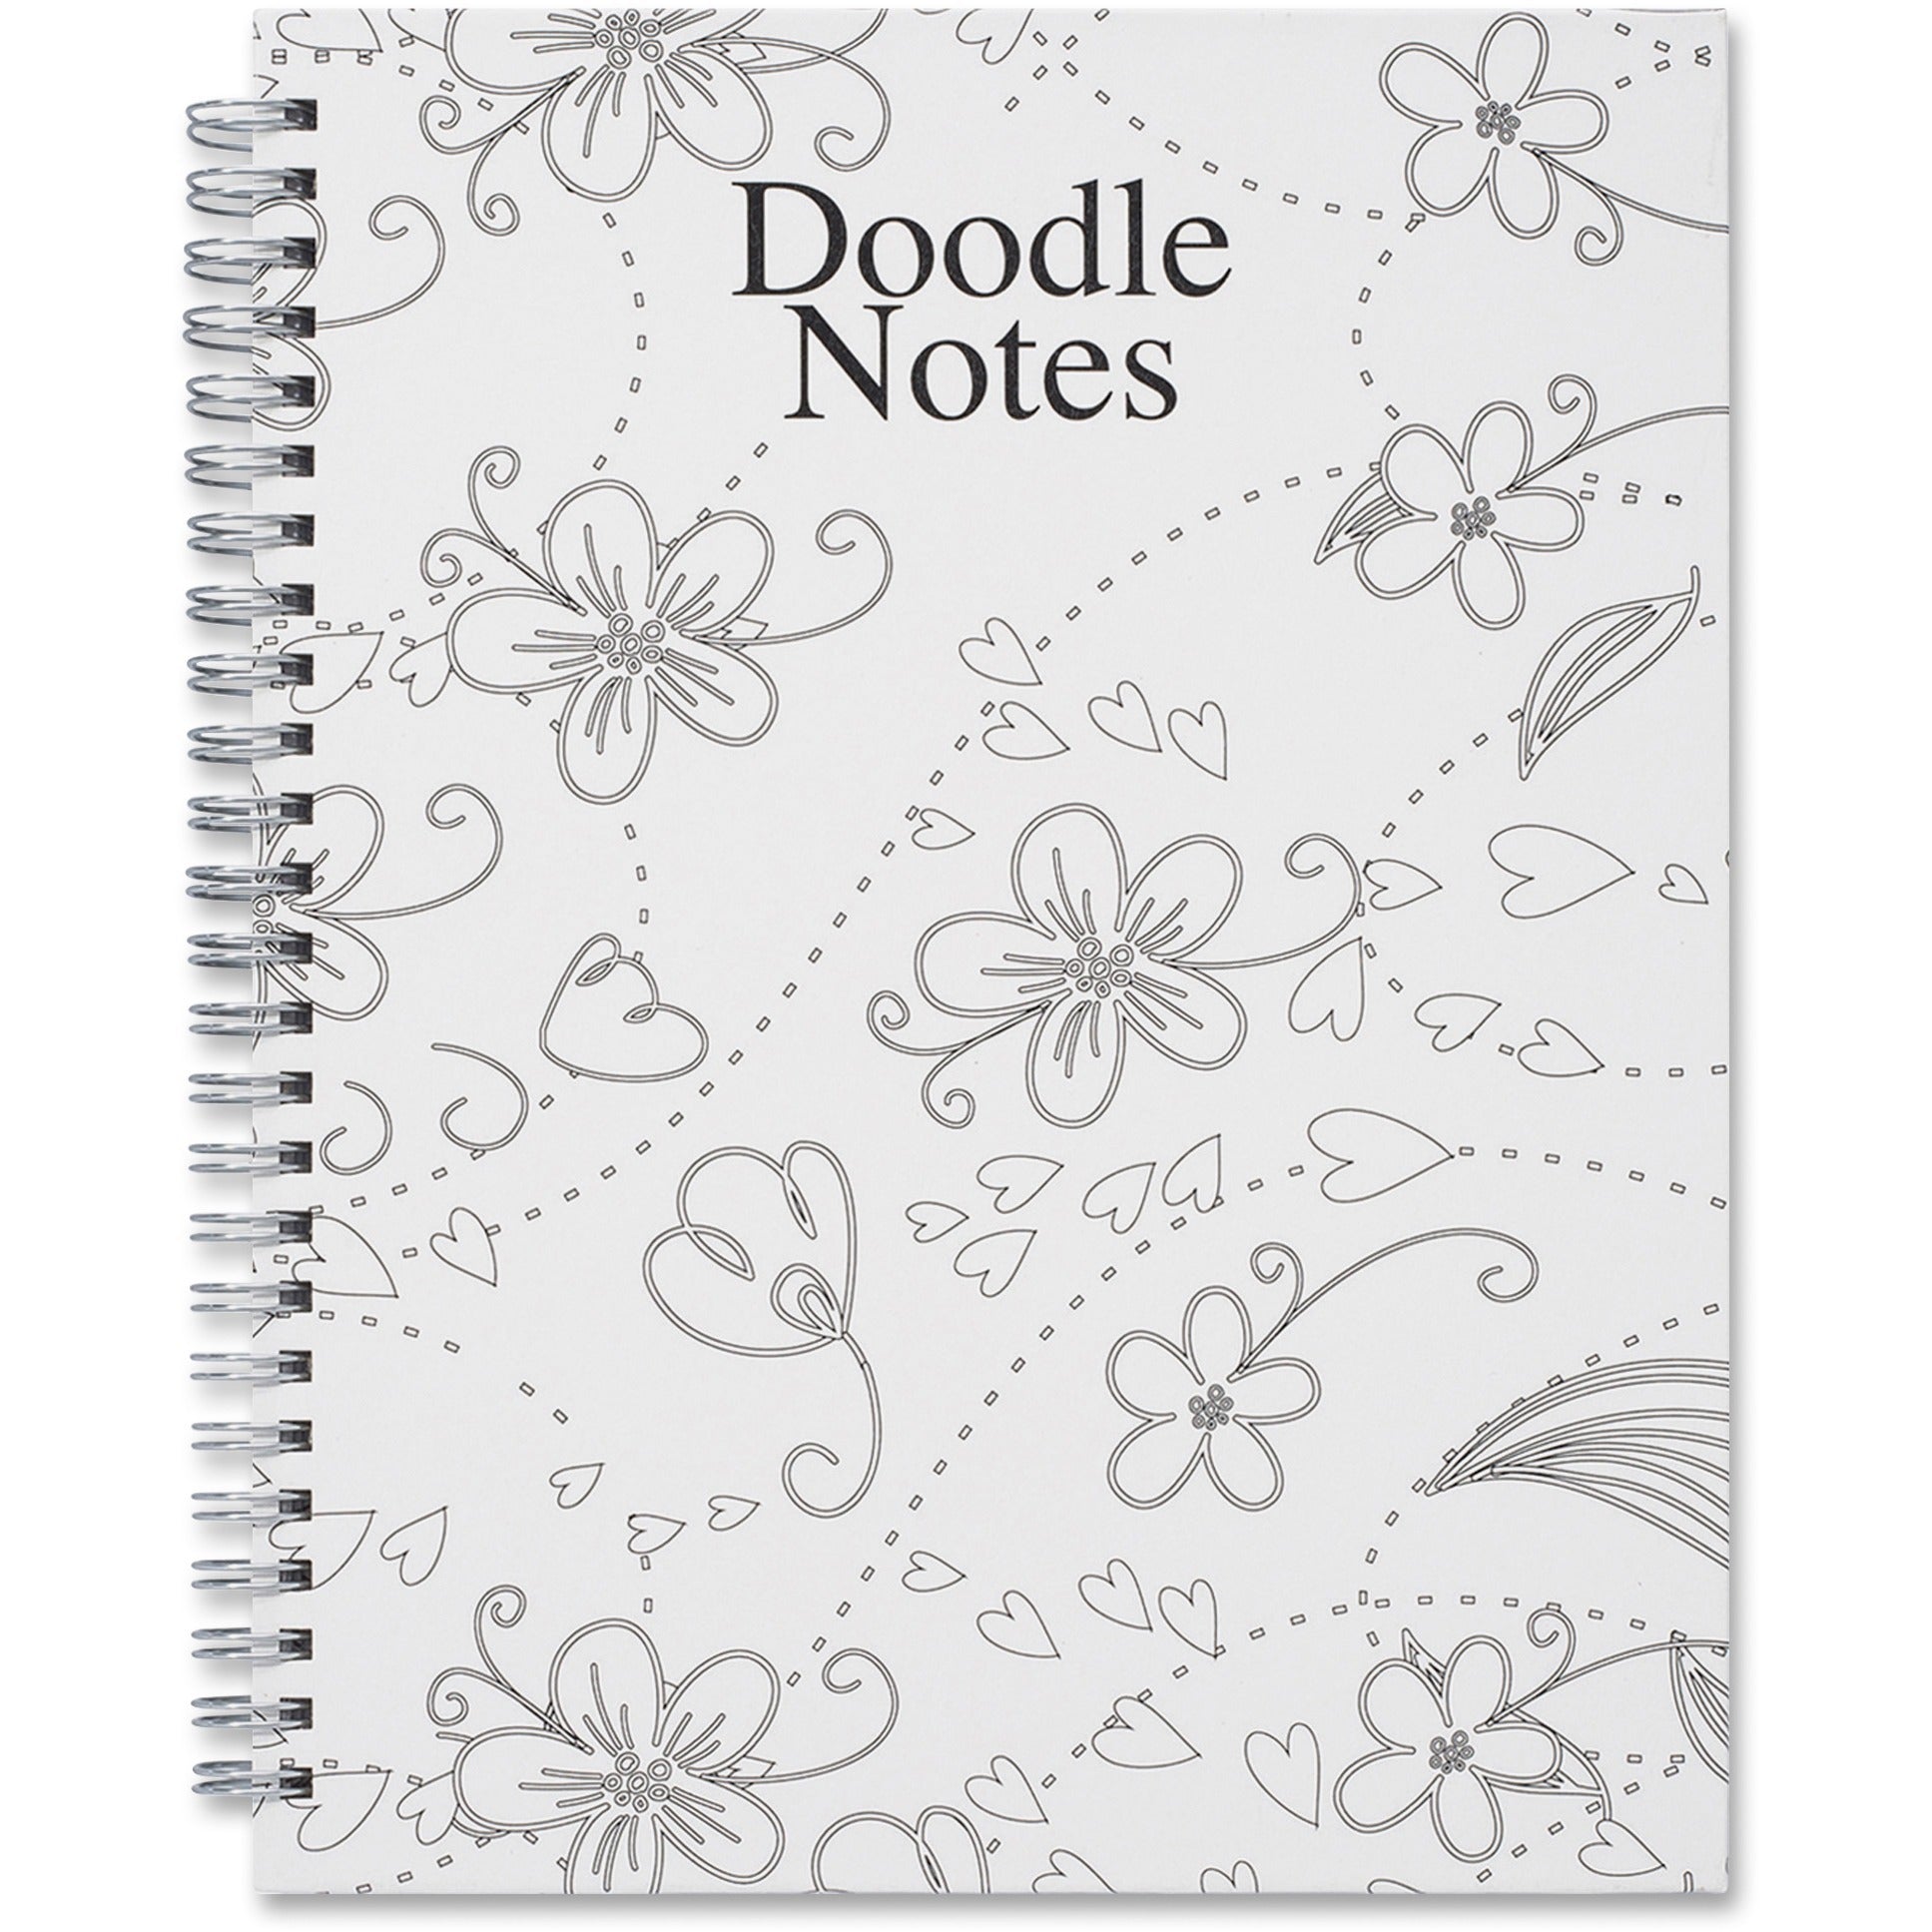 house-of-doolittle-doodle-notes-spiral-notebook-111-pages-spiral-bound-7-x-9-black-&-white-flower-cover-hard-cover-recycled-1-each_hod78190 - 2